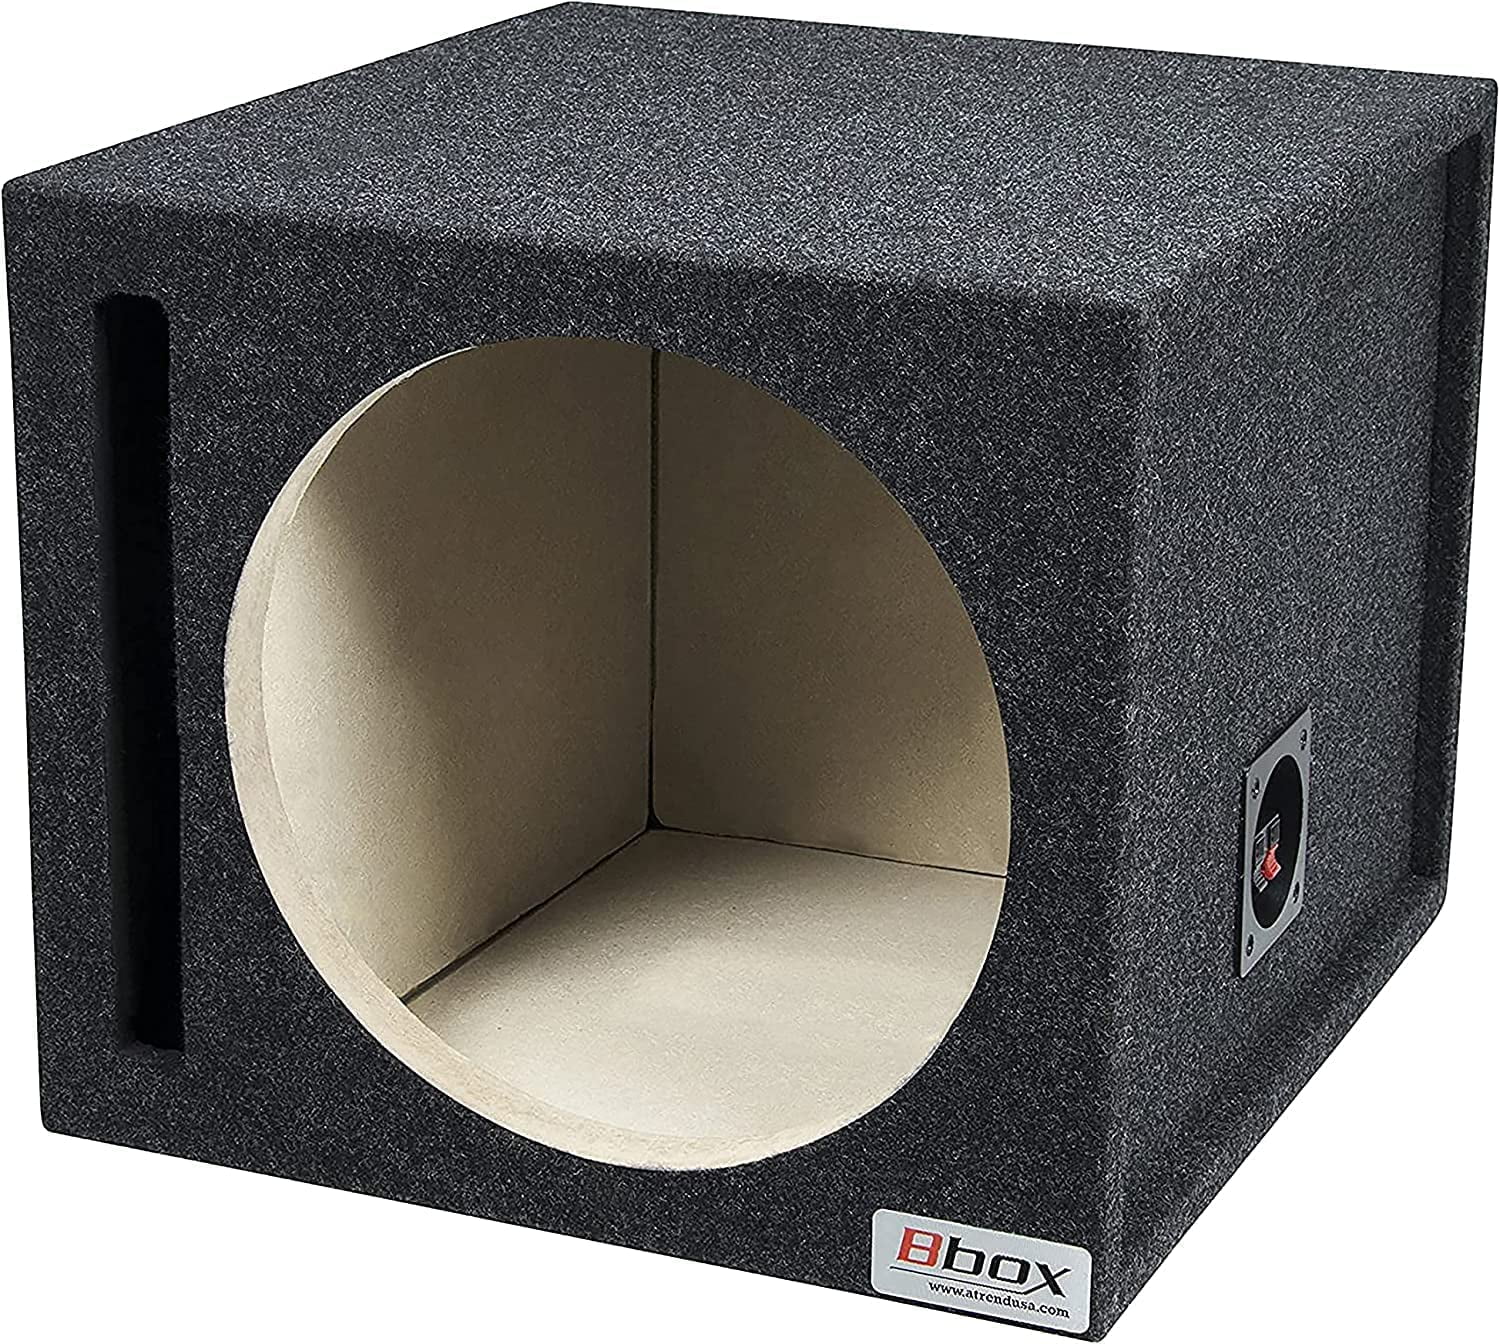 Bbox 12SVSC Single Vented 12 Inch Subwoofer - Premium Subwoofer Box Improves Audio Quality &amp; Bass - Car Subwoofer Boxes &amp; Enclosures with Nickel Terminals -